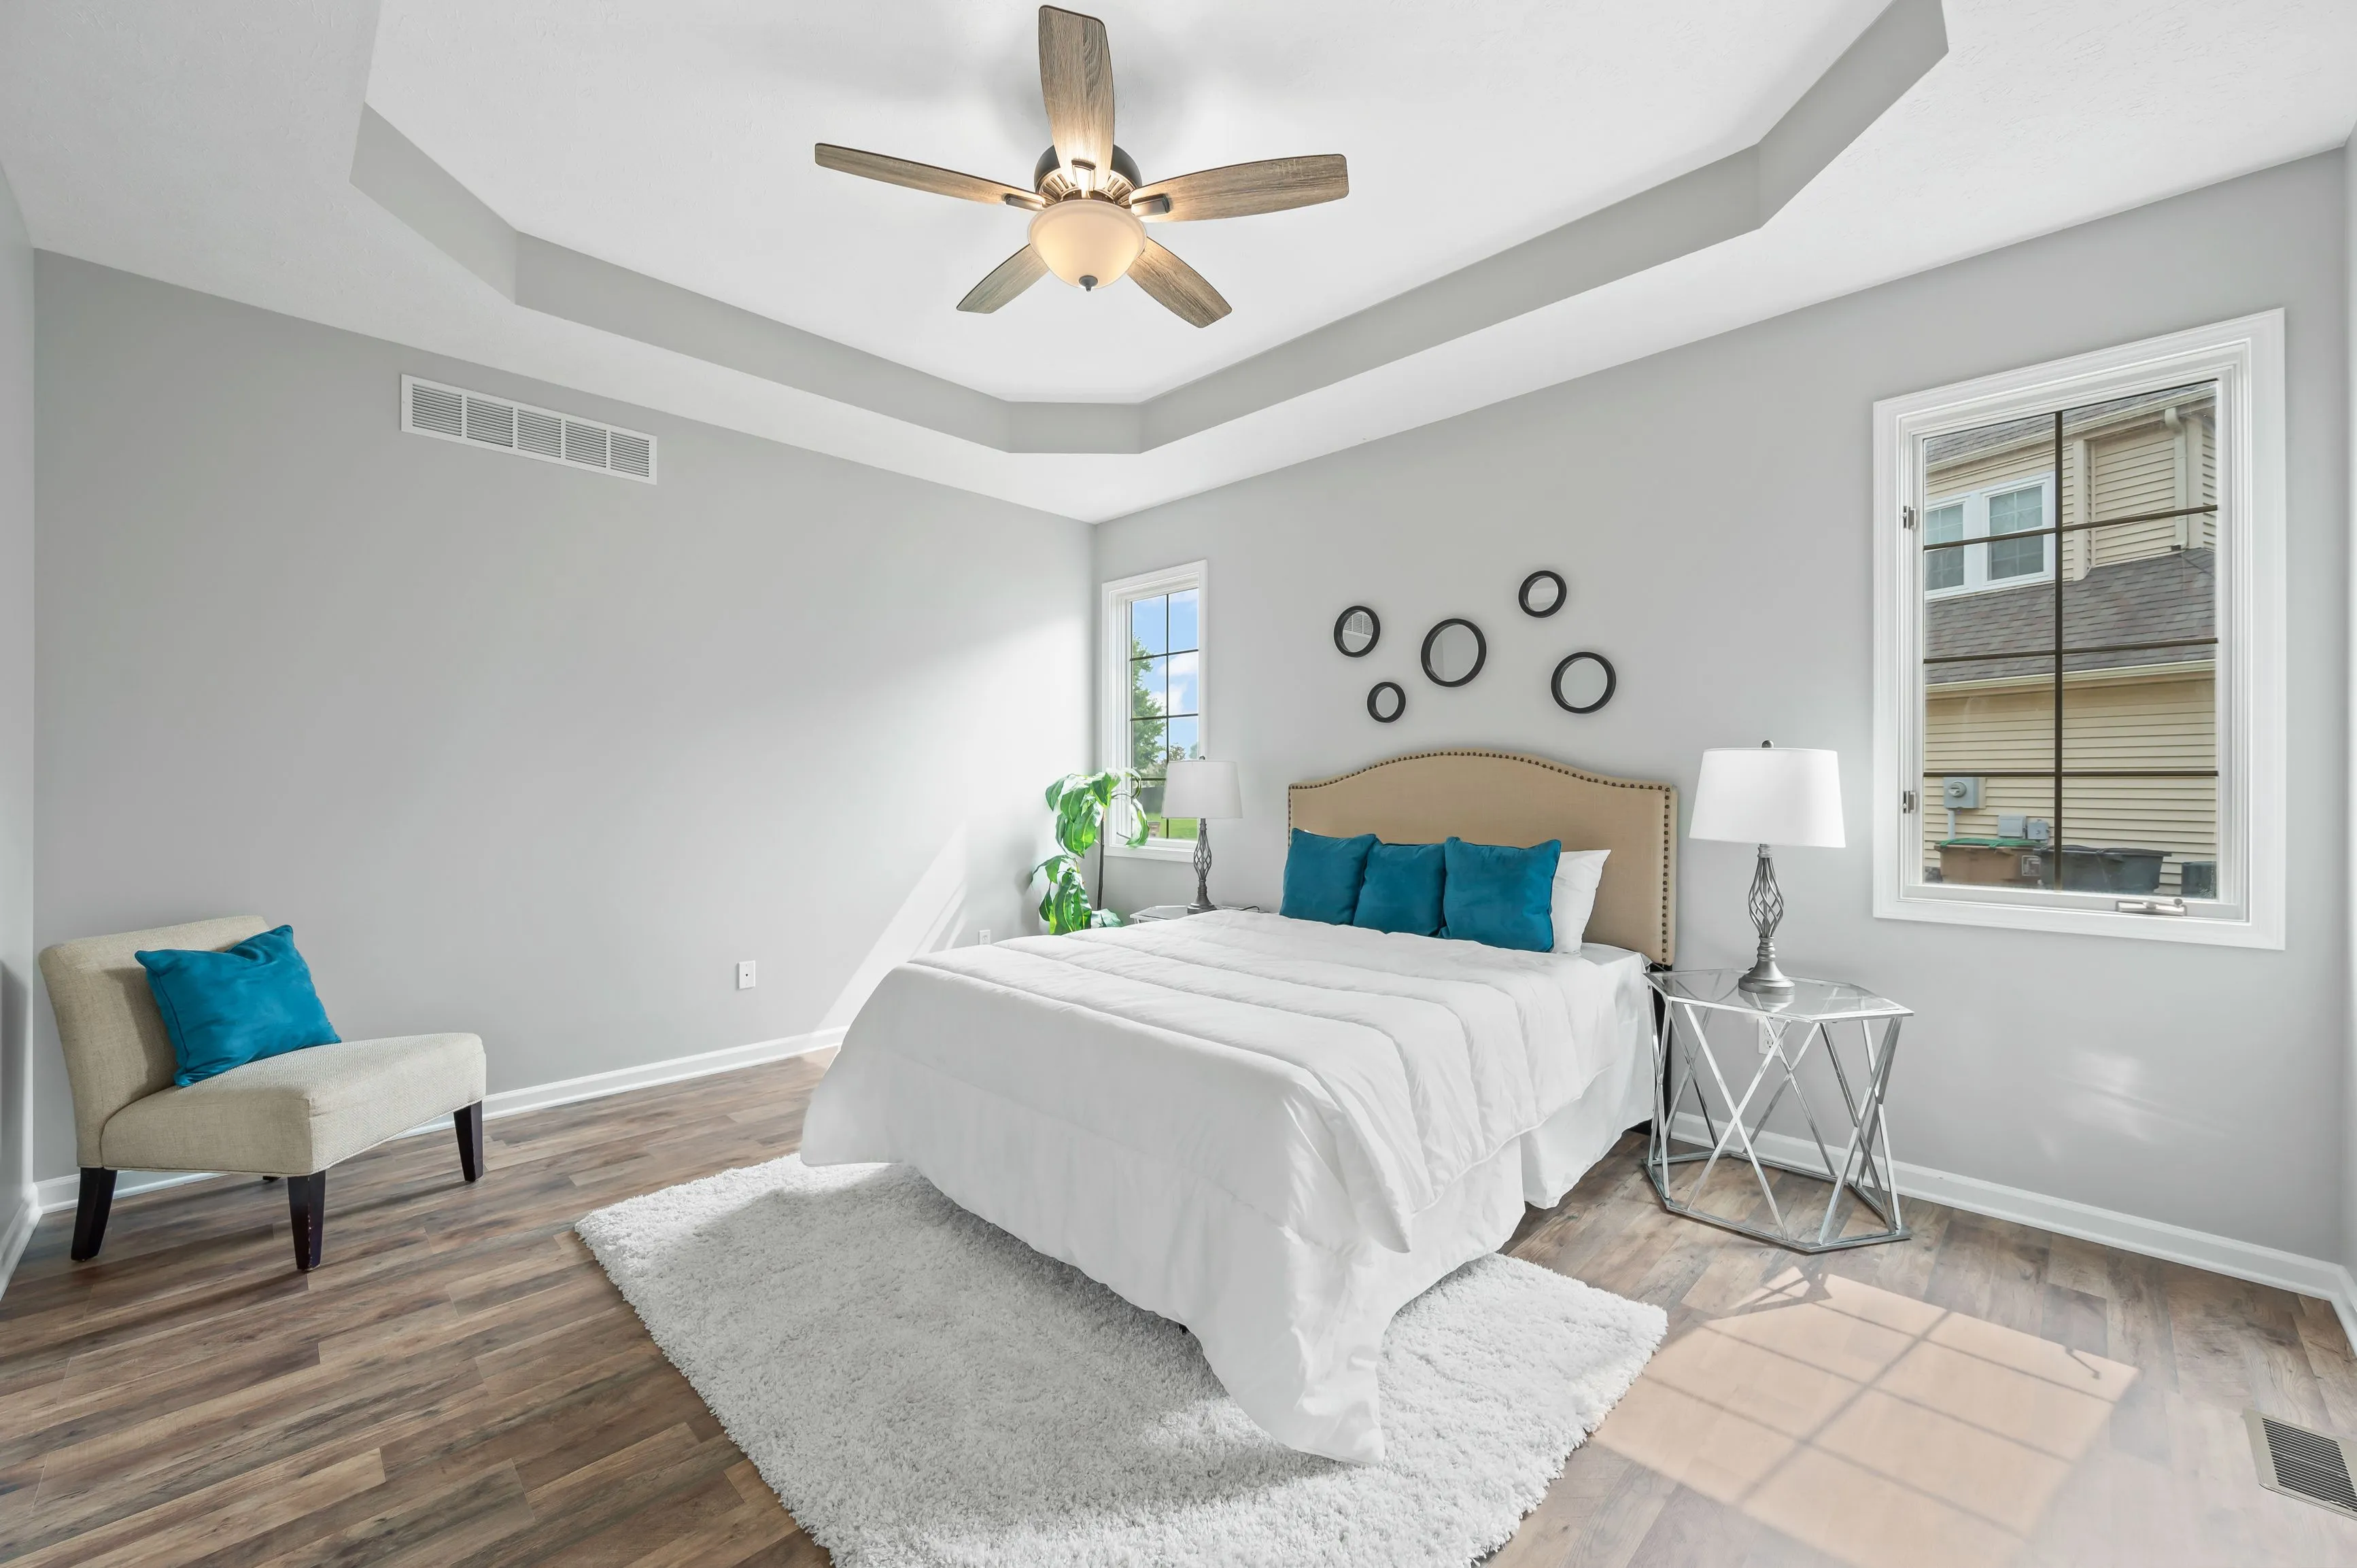 Bright modern bedroom with a large bed, ceiling fan, white walls with decorative mirrors, window with blinds, and a sitting area with a chair and side table.